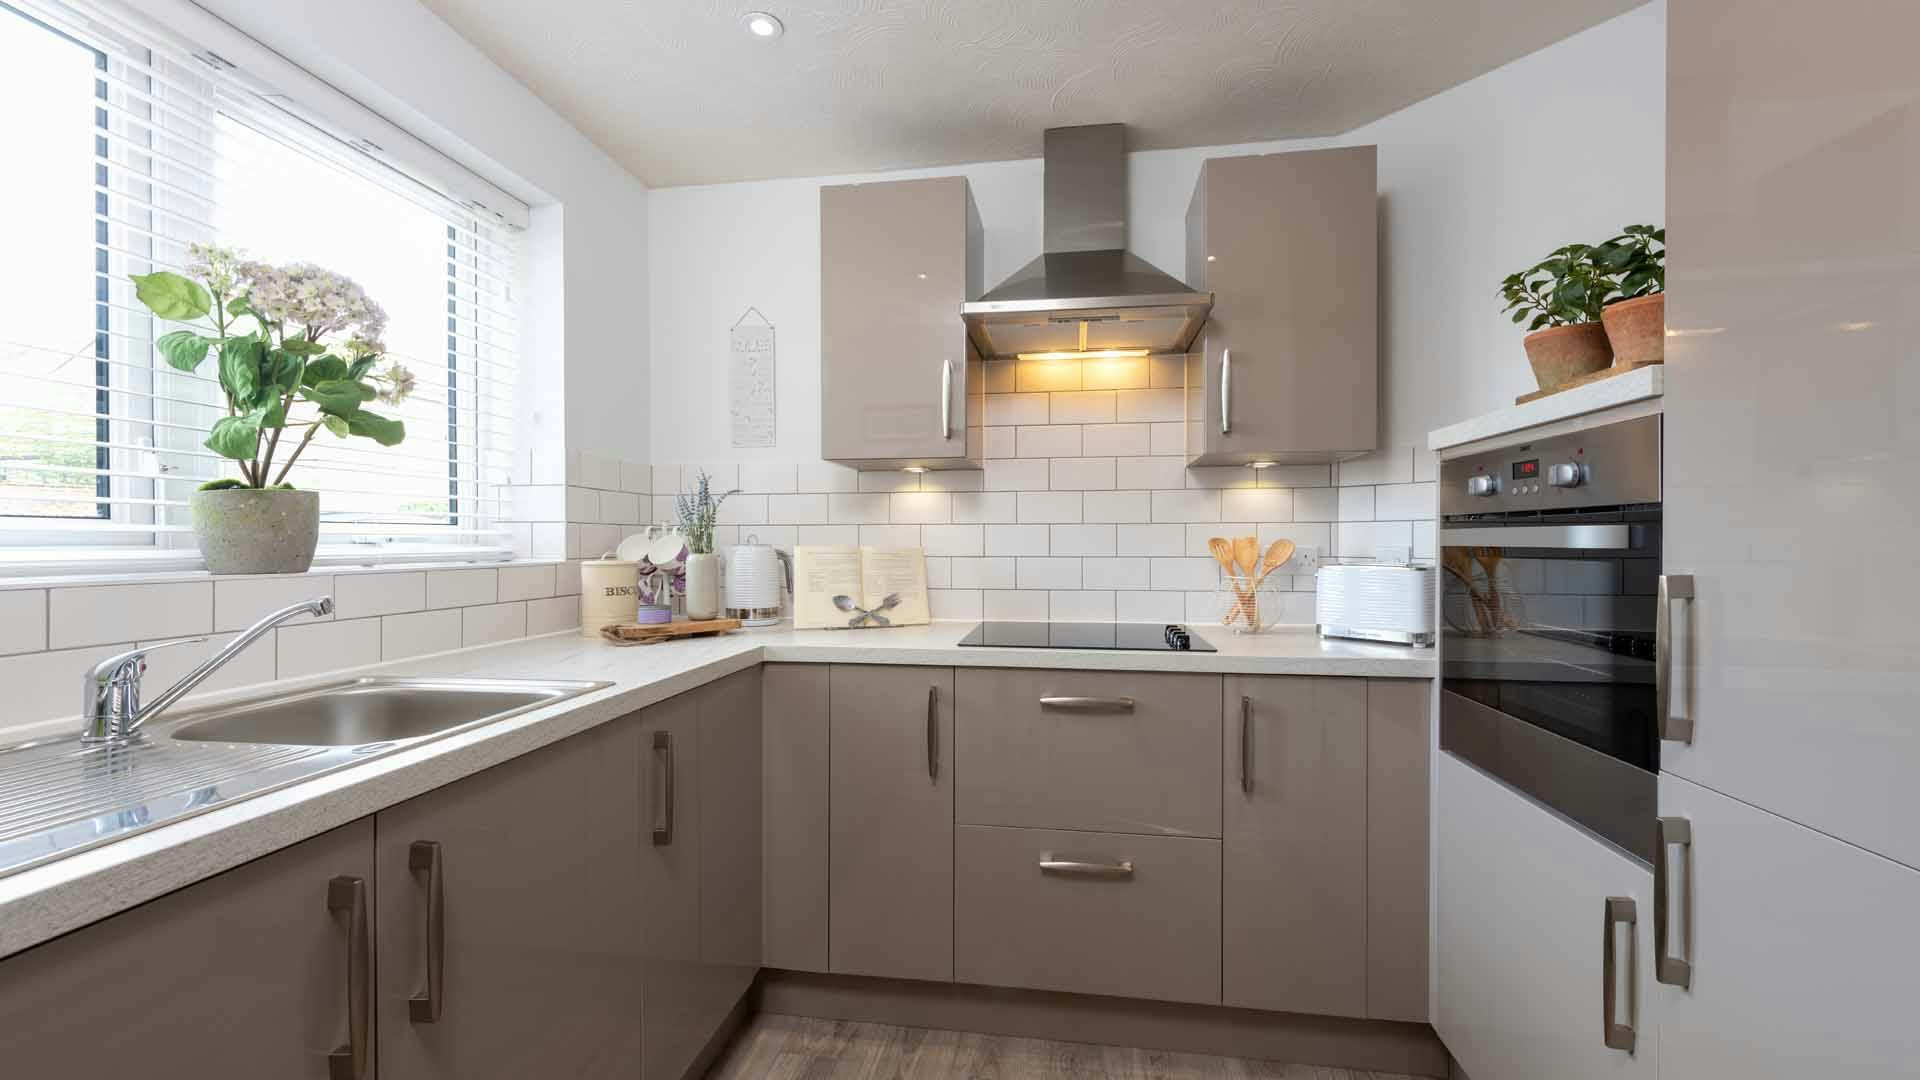 Kitchen of Mere Lodge & Hartismere Mews Retirement Apartment in Diss, Norfolk